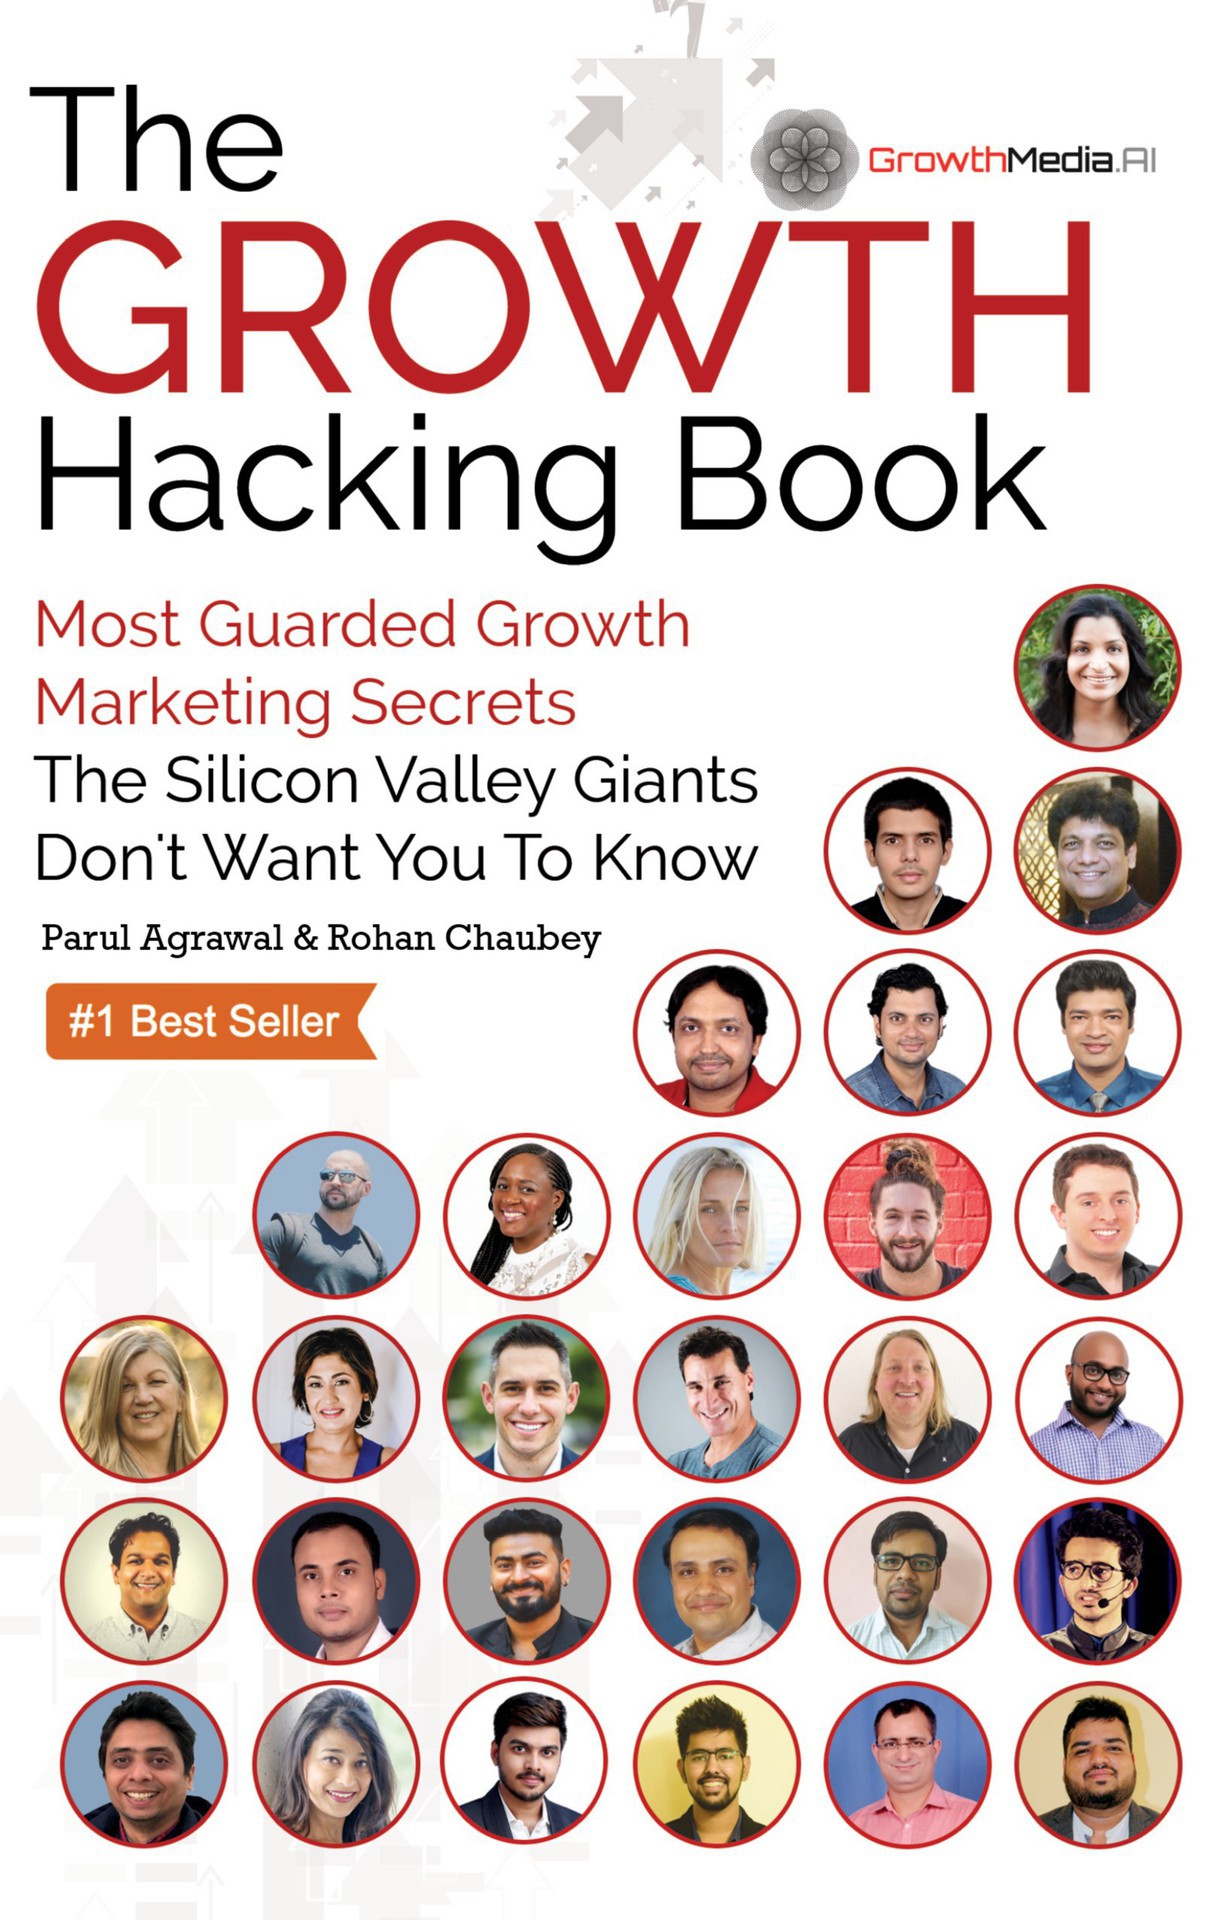 The Growth Hacking Book: Most Guarded Growth Marketing Secrets the Silicon Valley Giants Don't Want You to Know